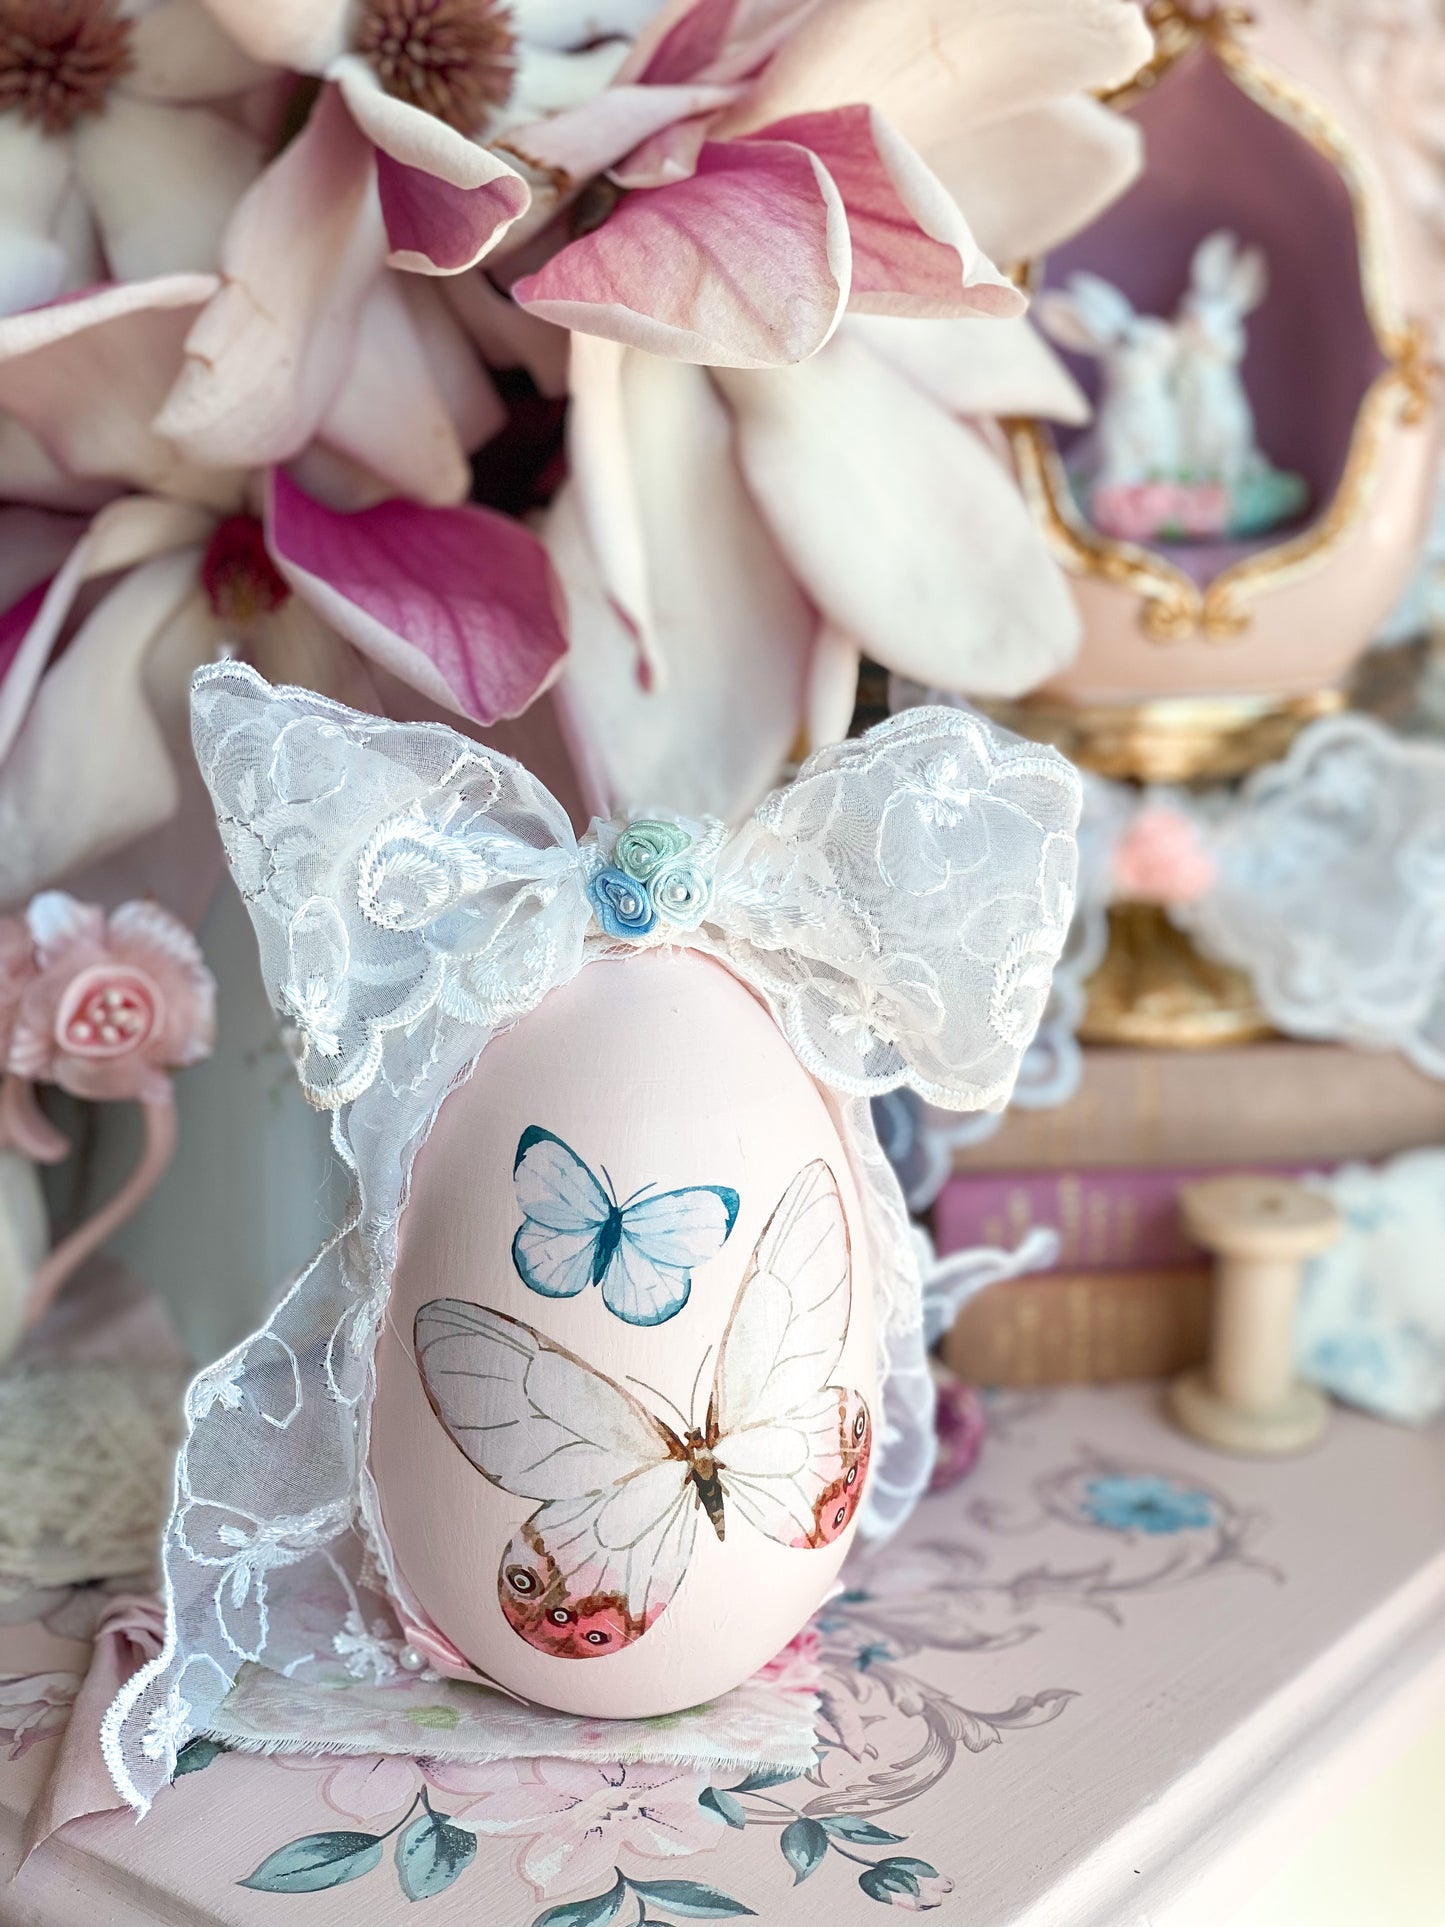 Bespoke Pastel Pink Easter Egg with Blue and White Butterflies and Vintage Chiffon Bow